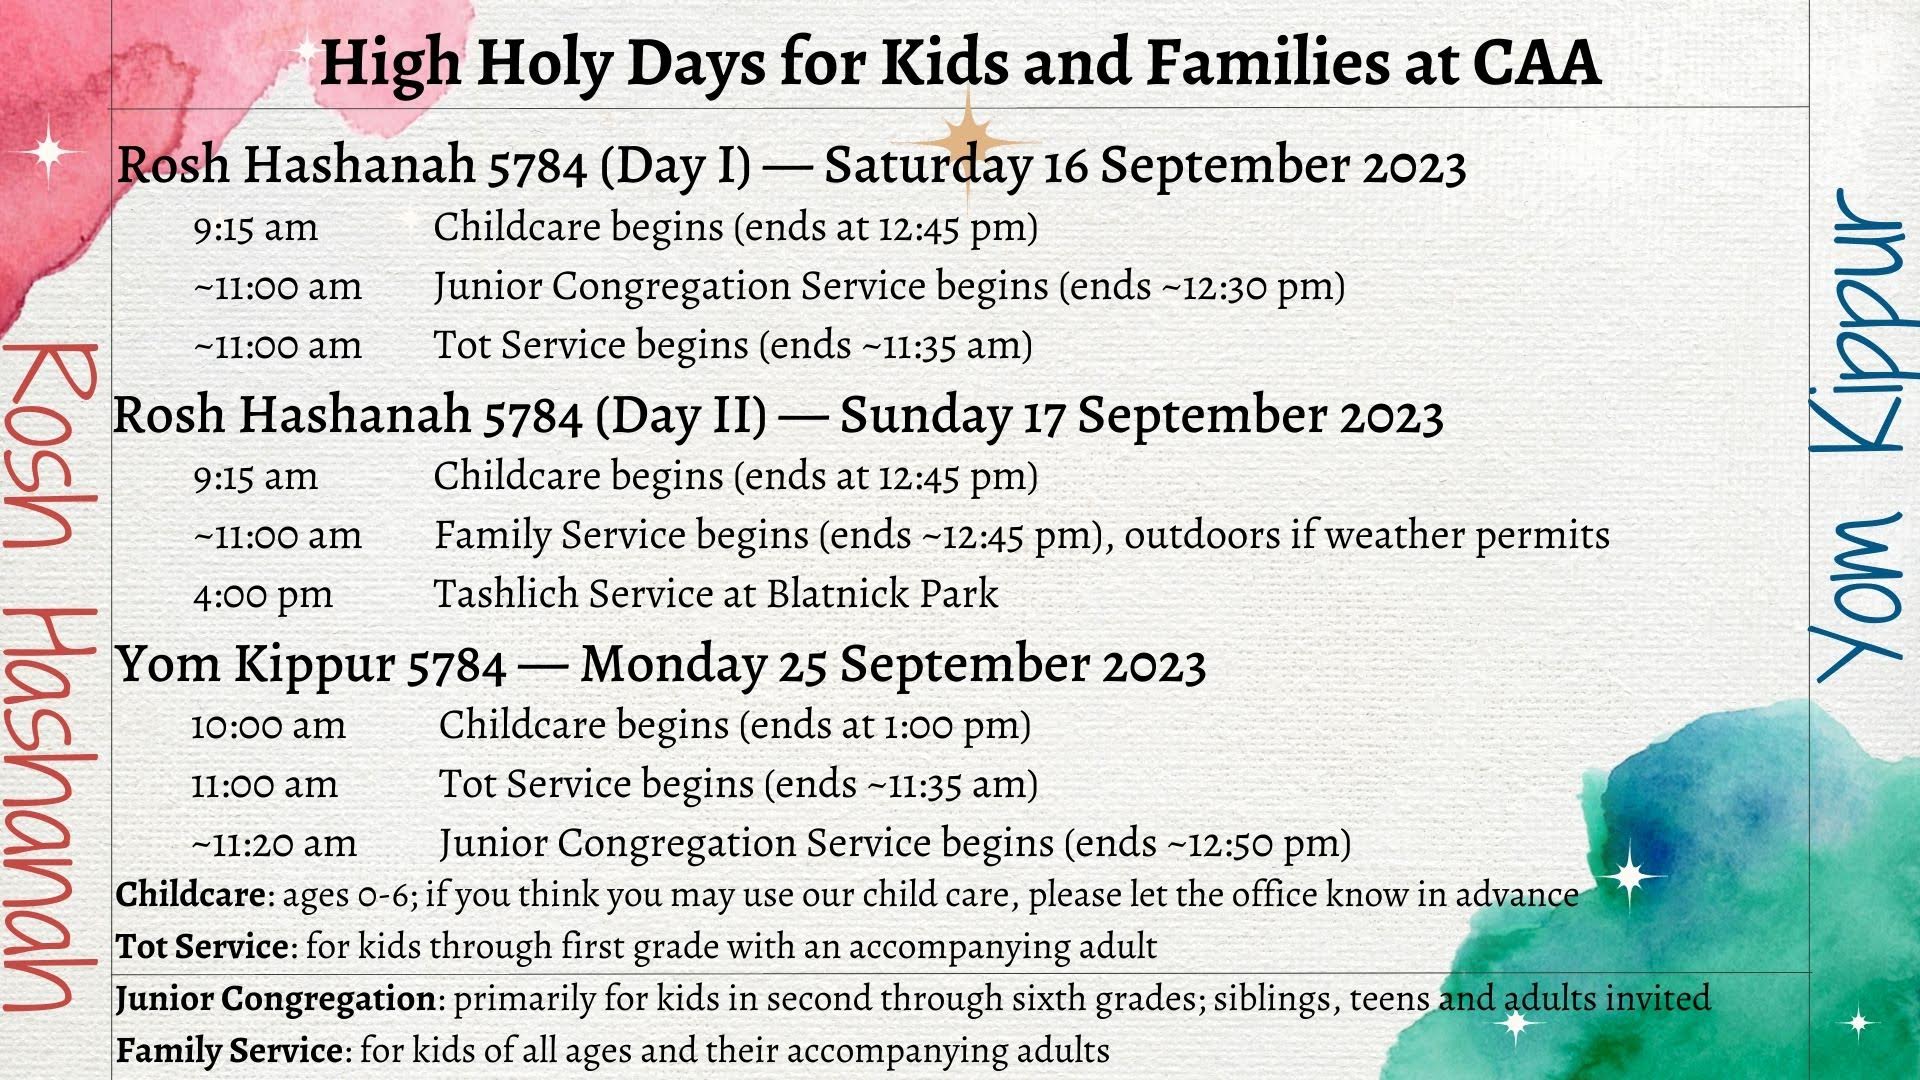 High Holy Days for Kids and Families at Congregation Agudat Achim